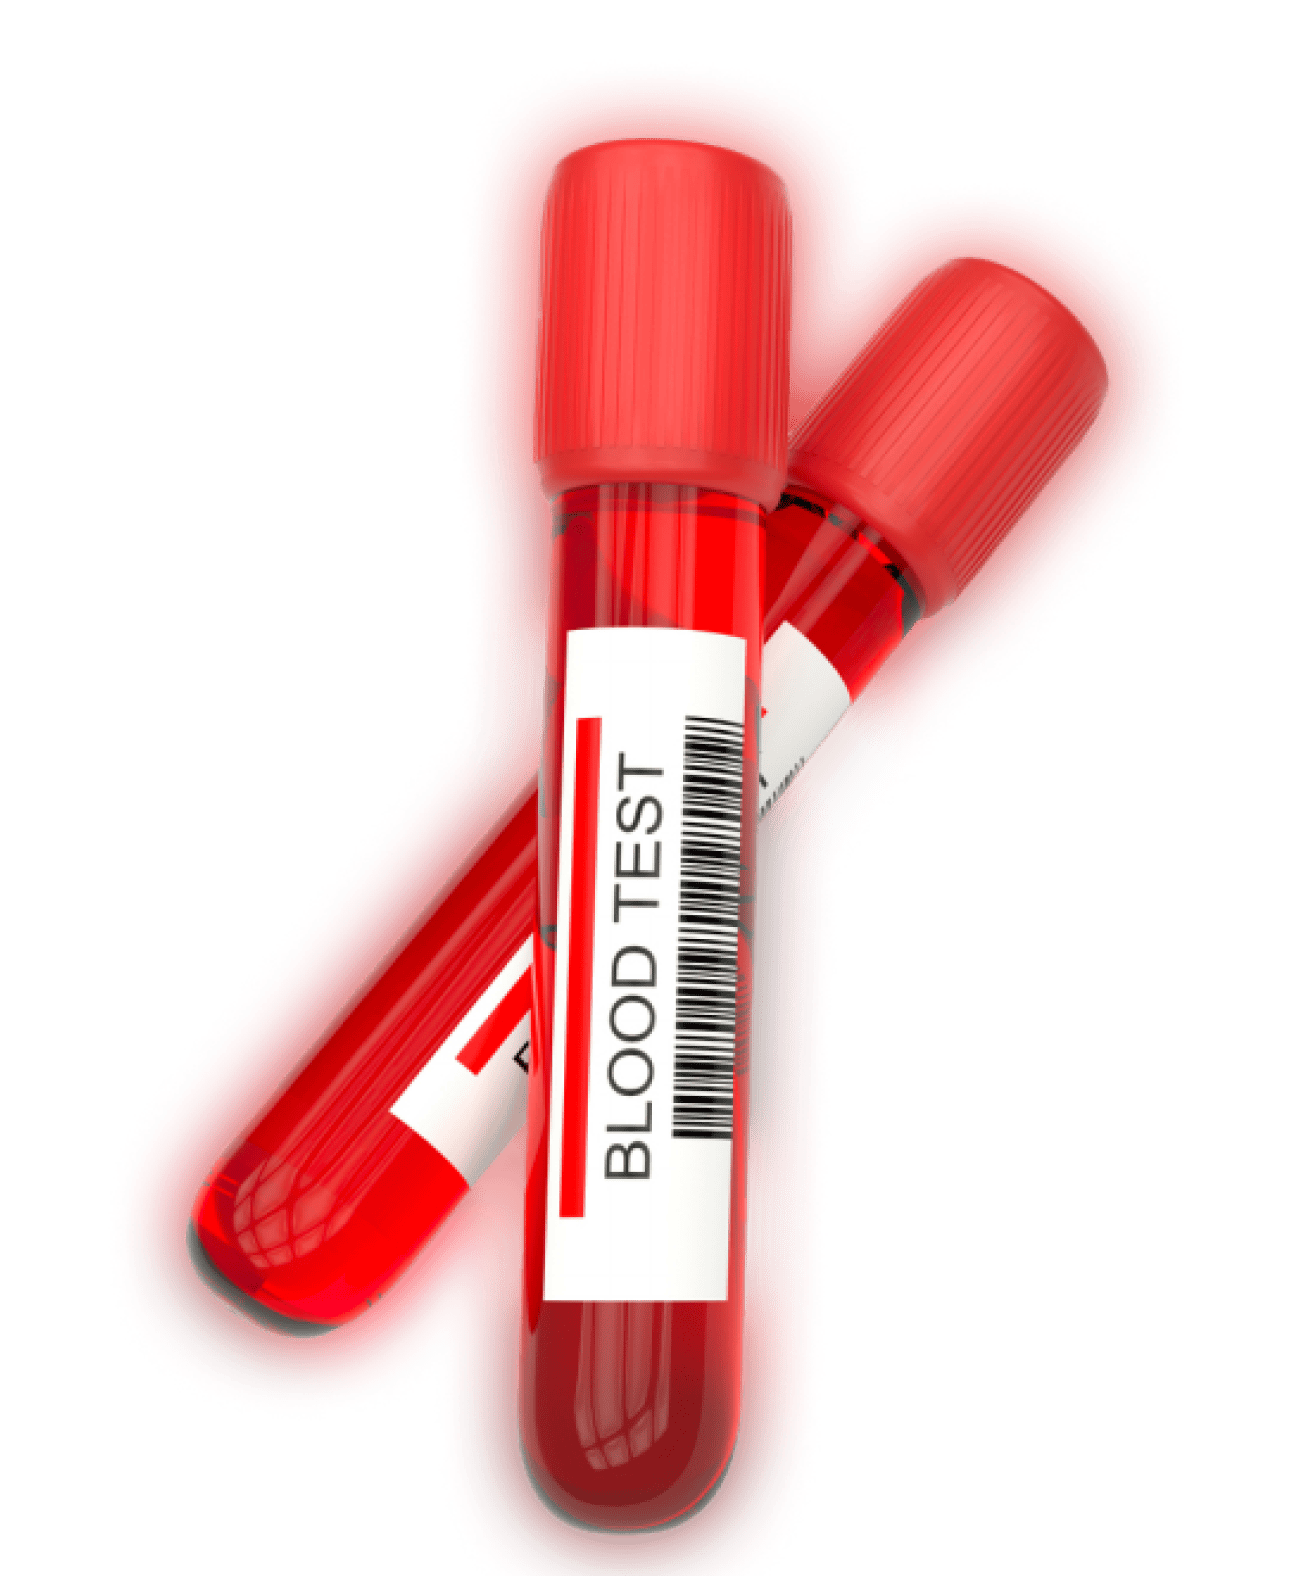 Two red-capped blood test tubes labeled "Blood Test," filled with red liquid, are crossed and highlighted in a soft red glow.